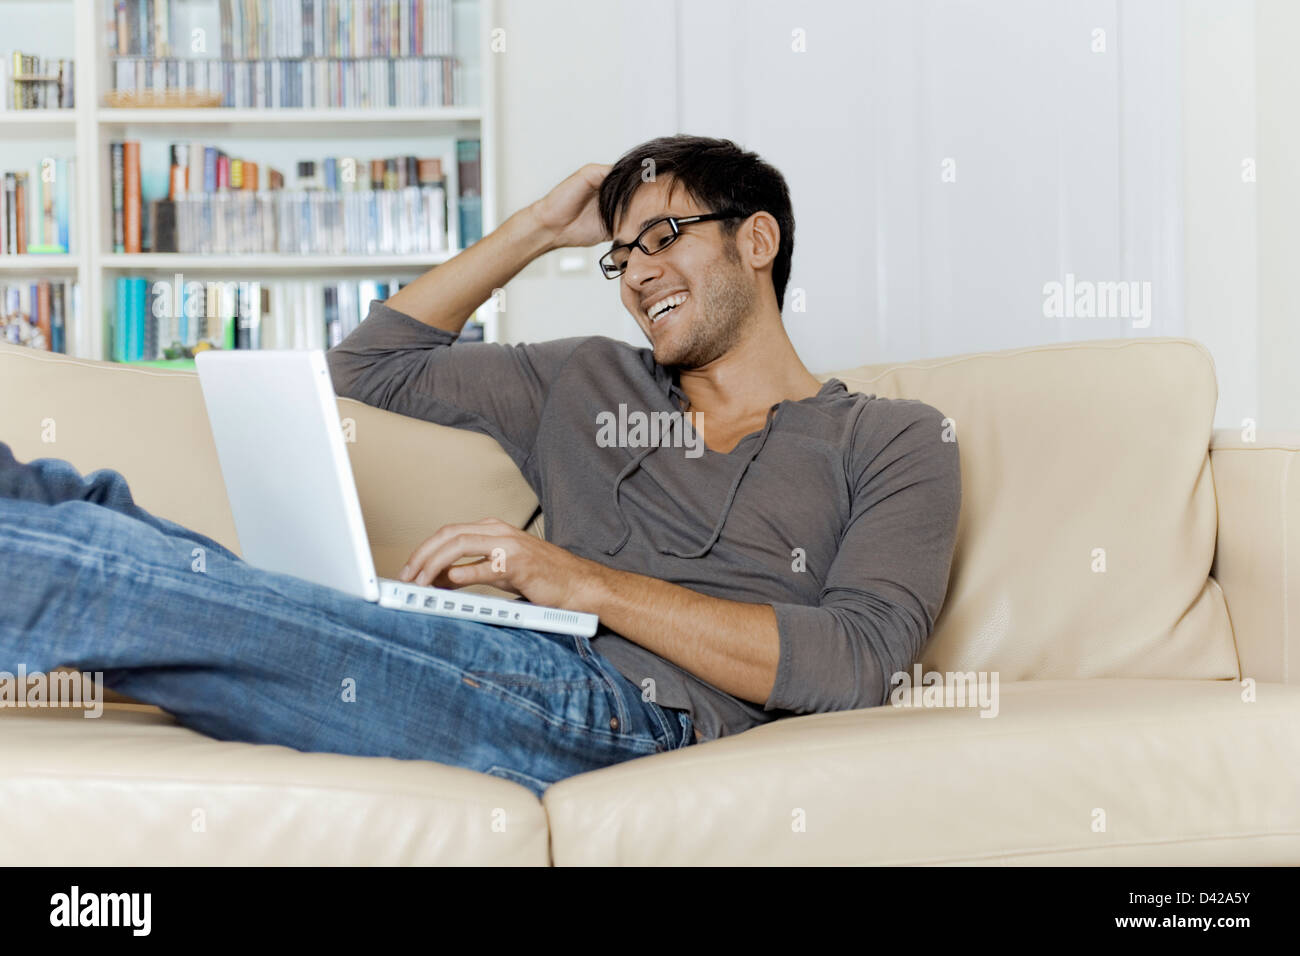 A man very comfortable surfing the internet using a laptop. Stock Photo